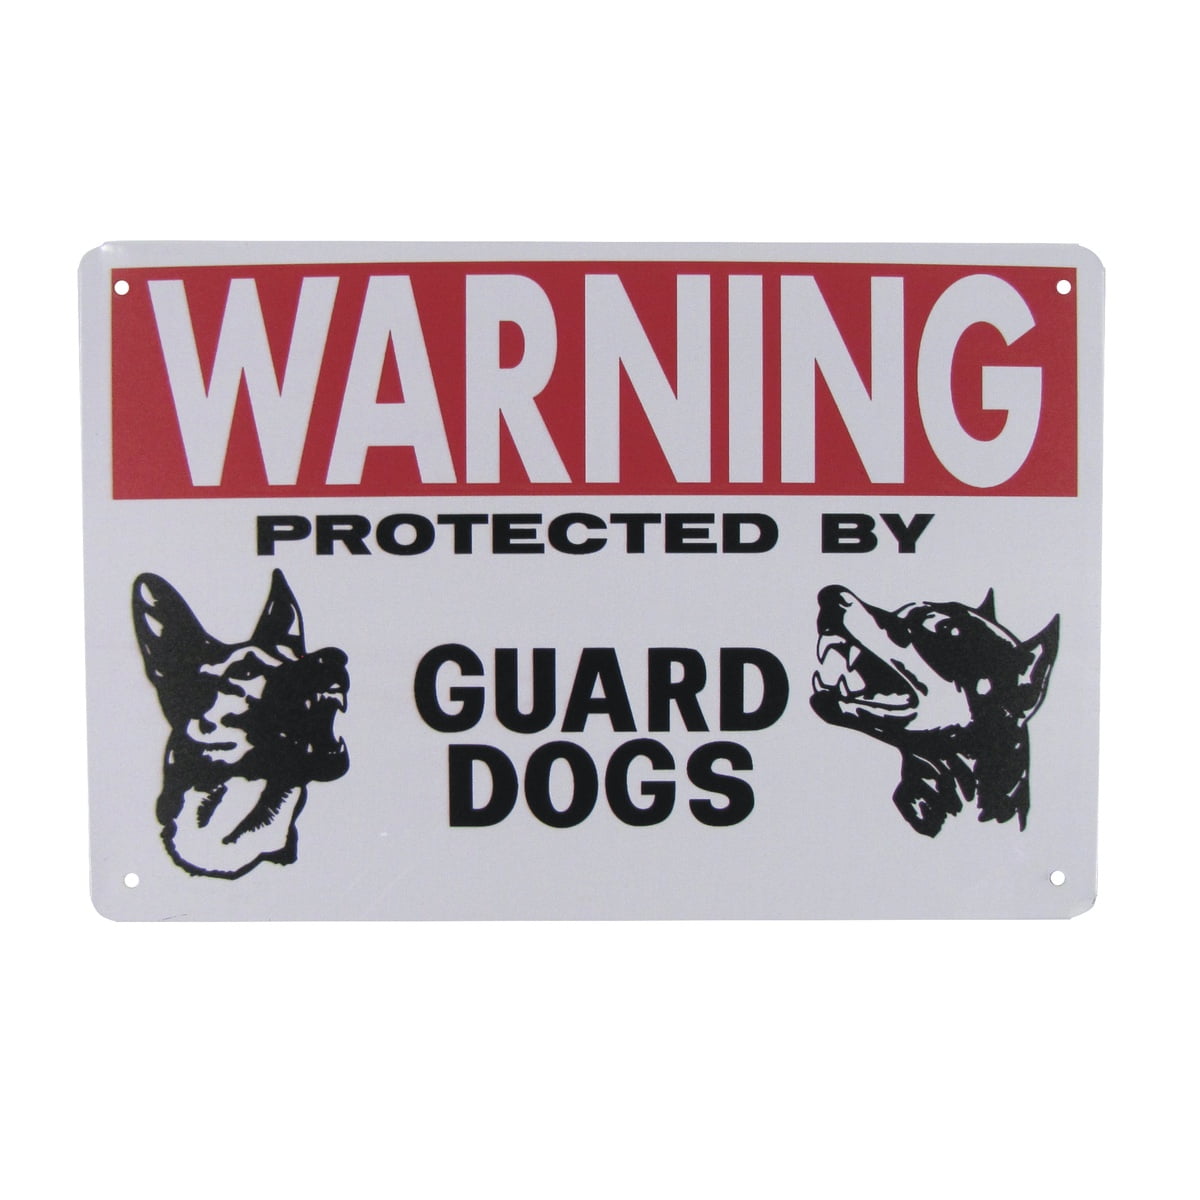 1x Danger Guard Dogs Warning Sticker for Home Box Door Work Store Business #01 